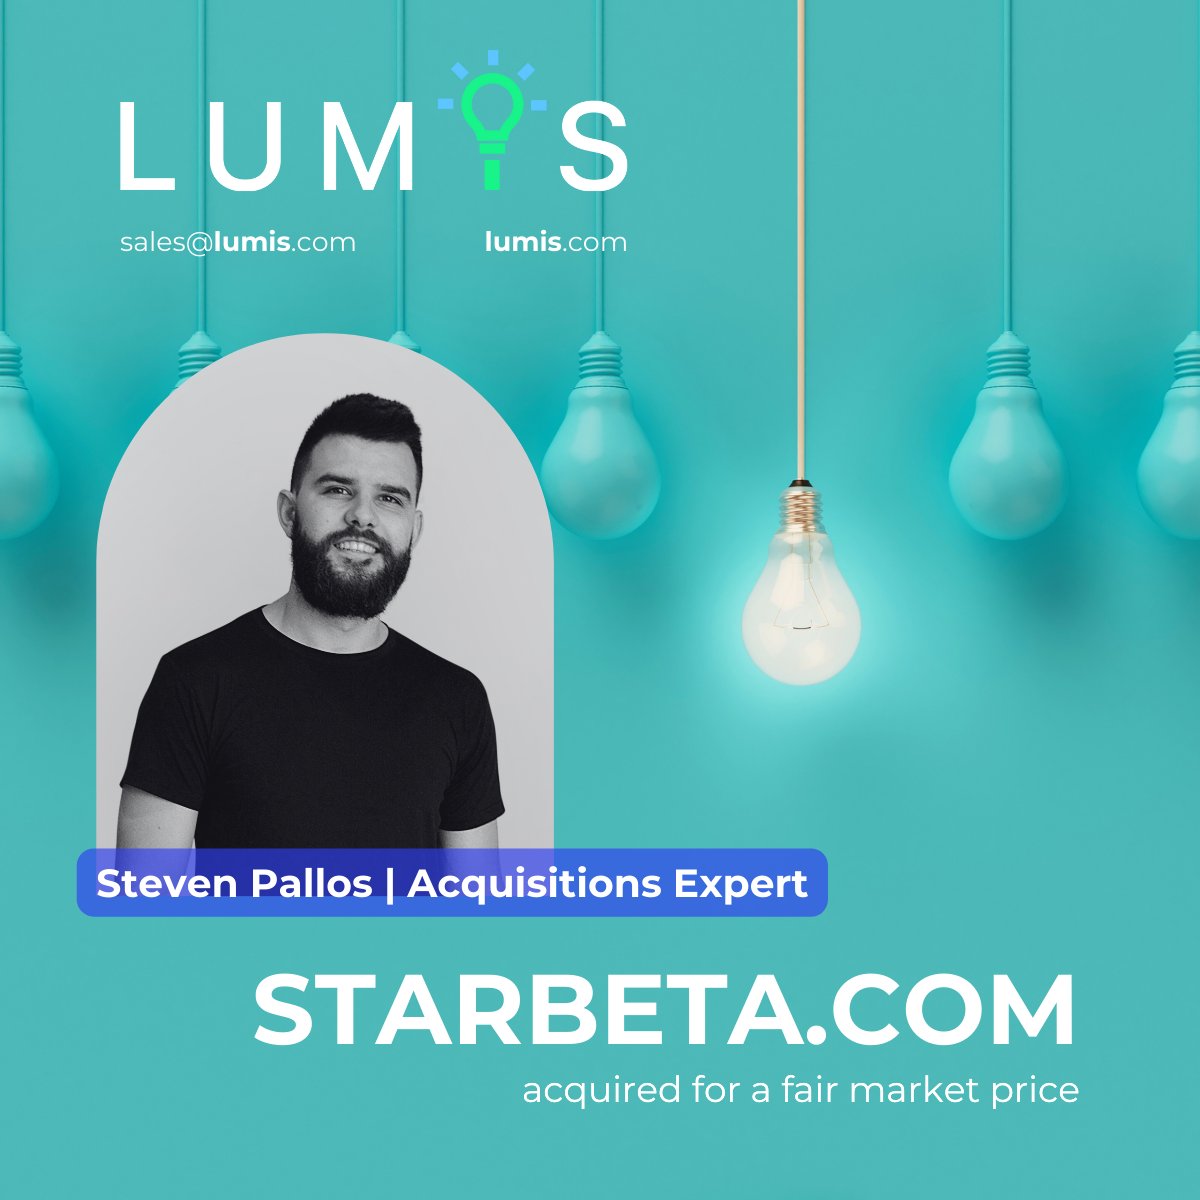 Starbeta.com has been acquired!